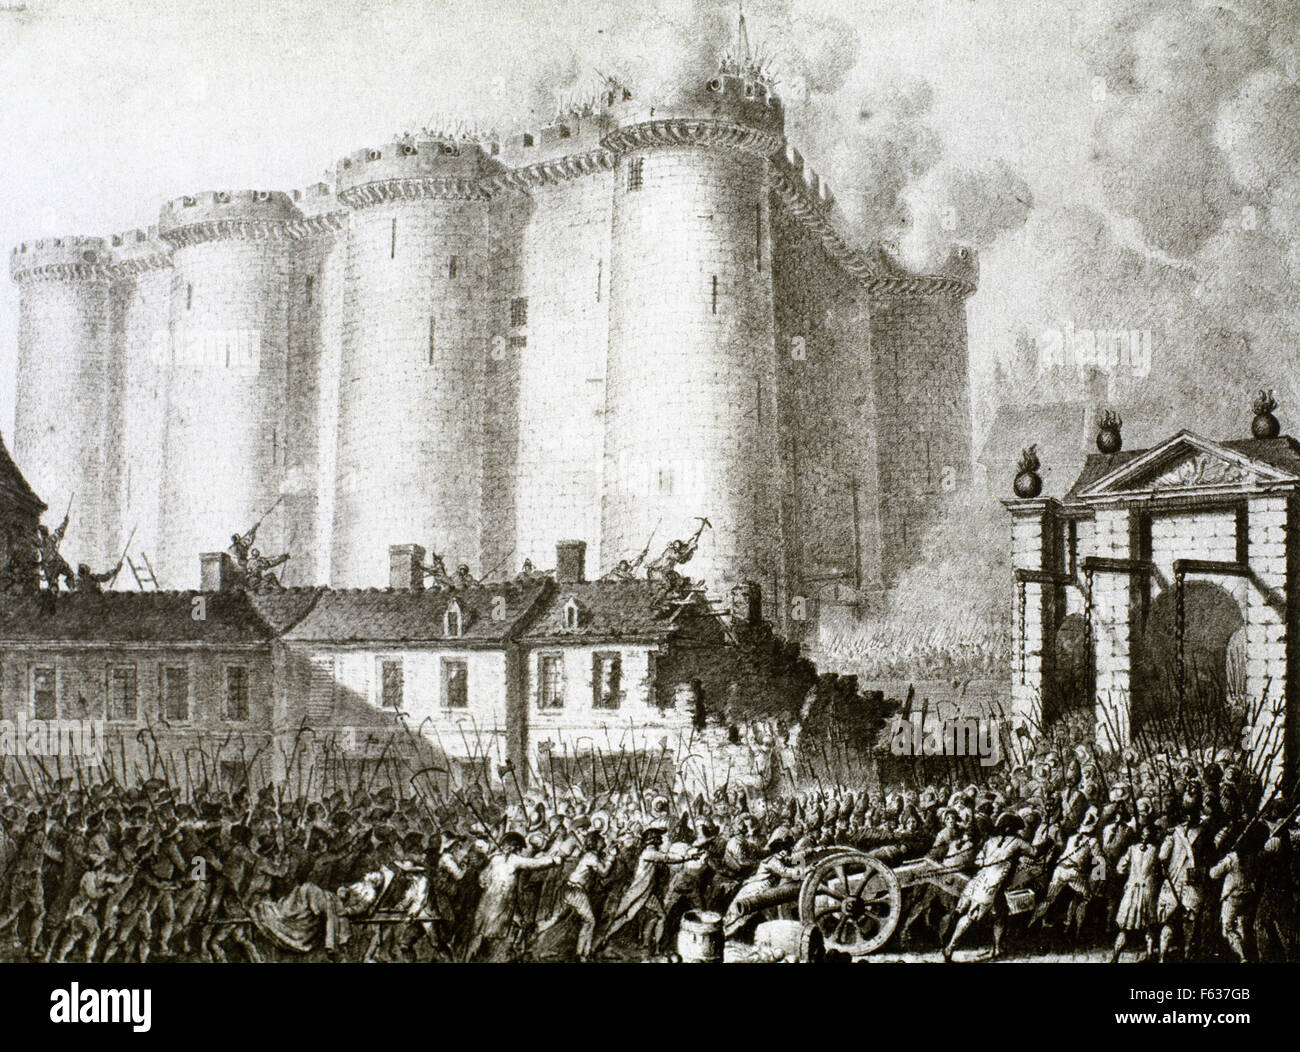 France, French Revolution. Storming of the Bastille, 14 July 1789. Engraving. Stock Photo